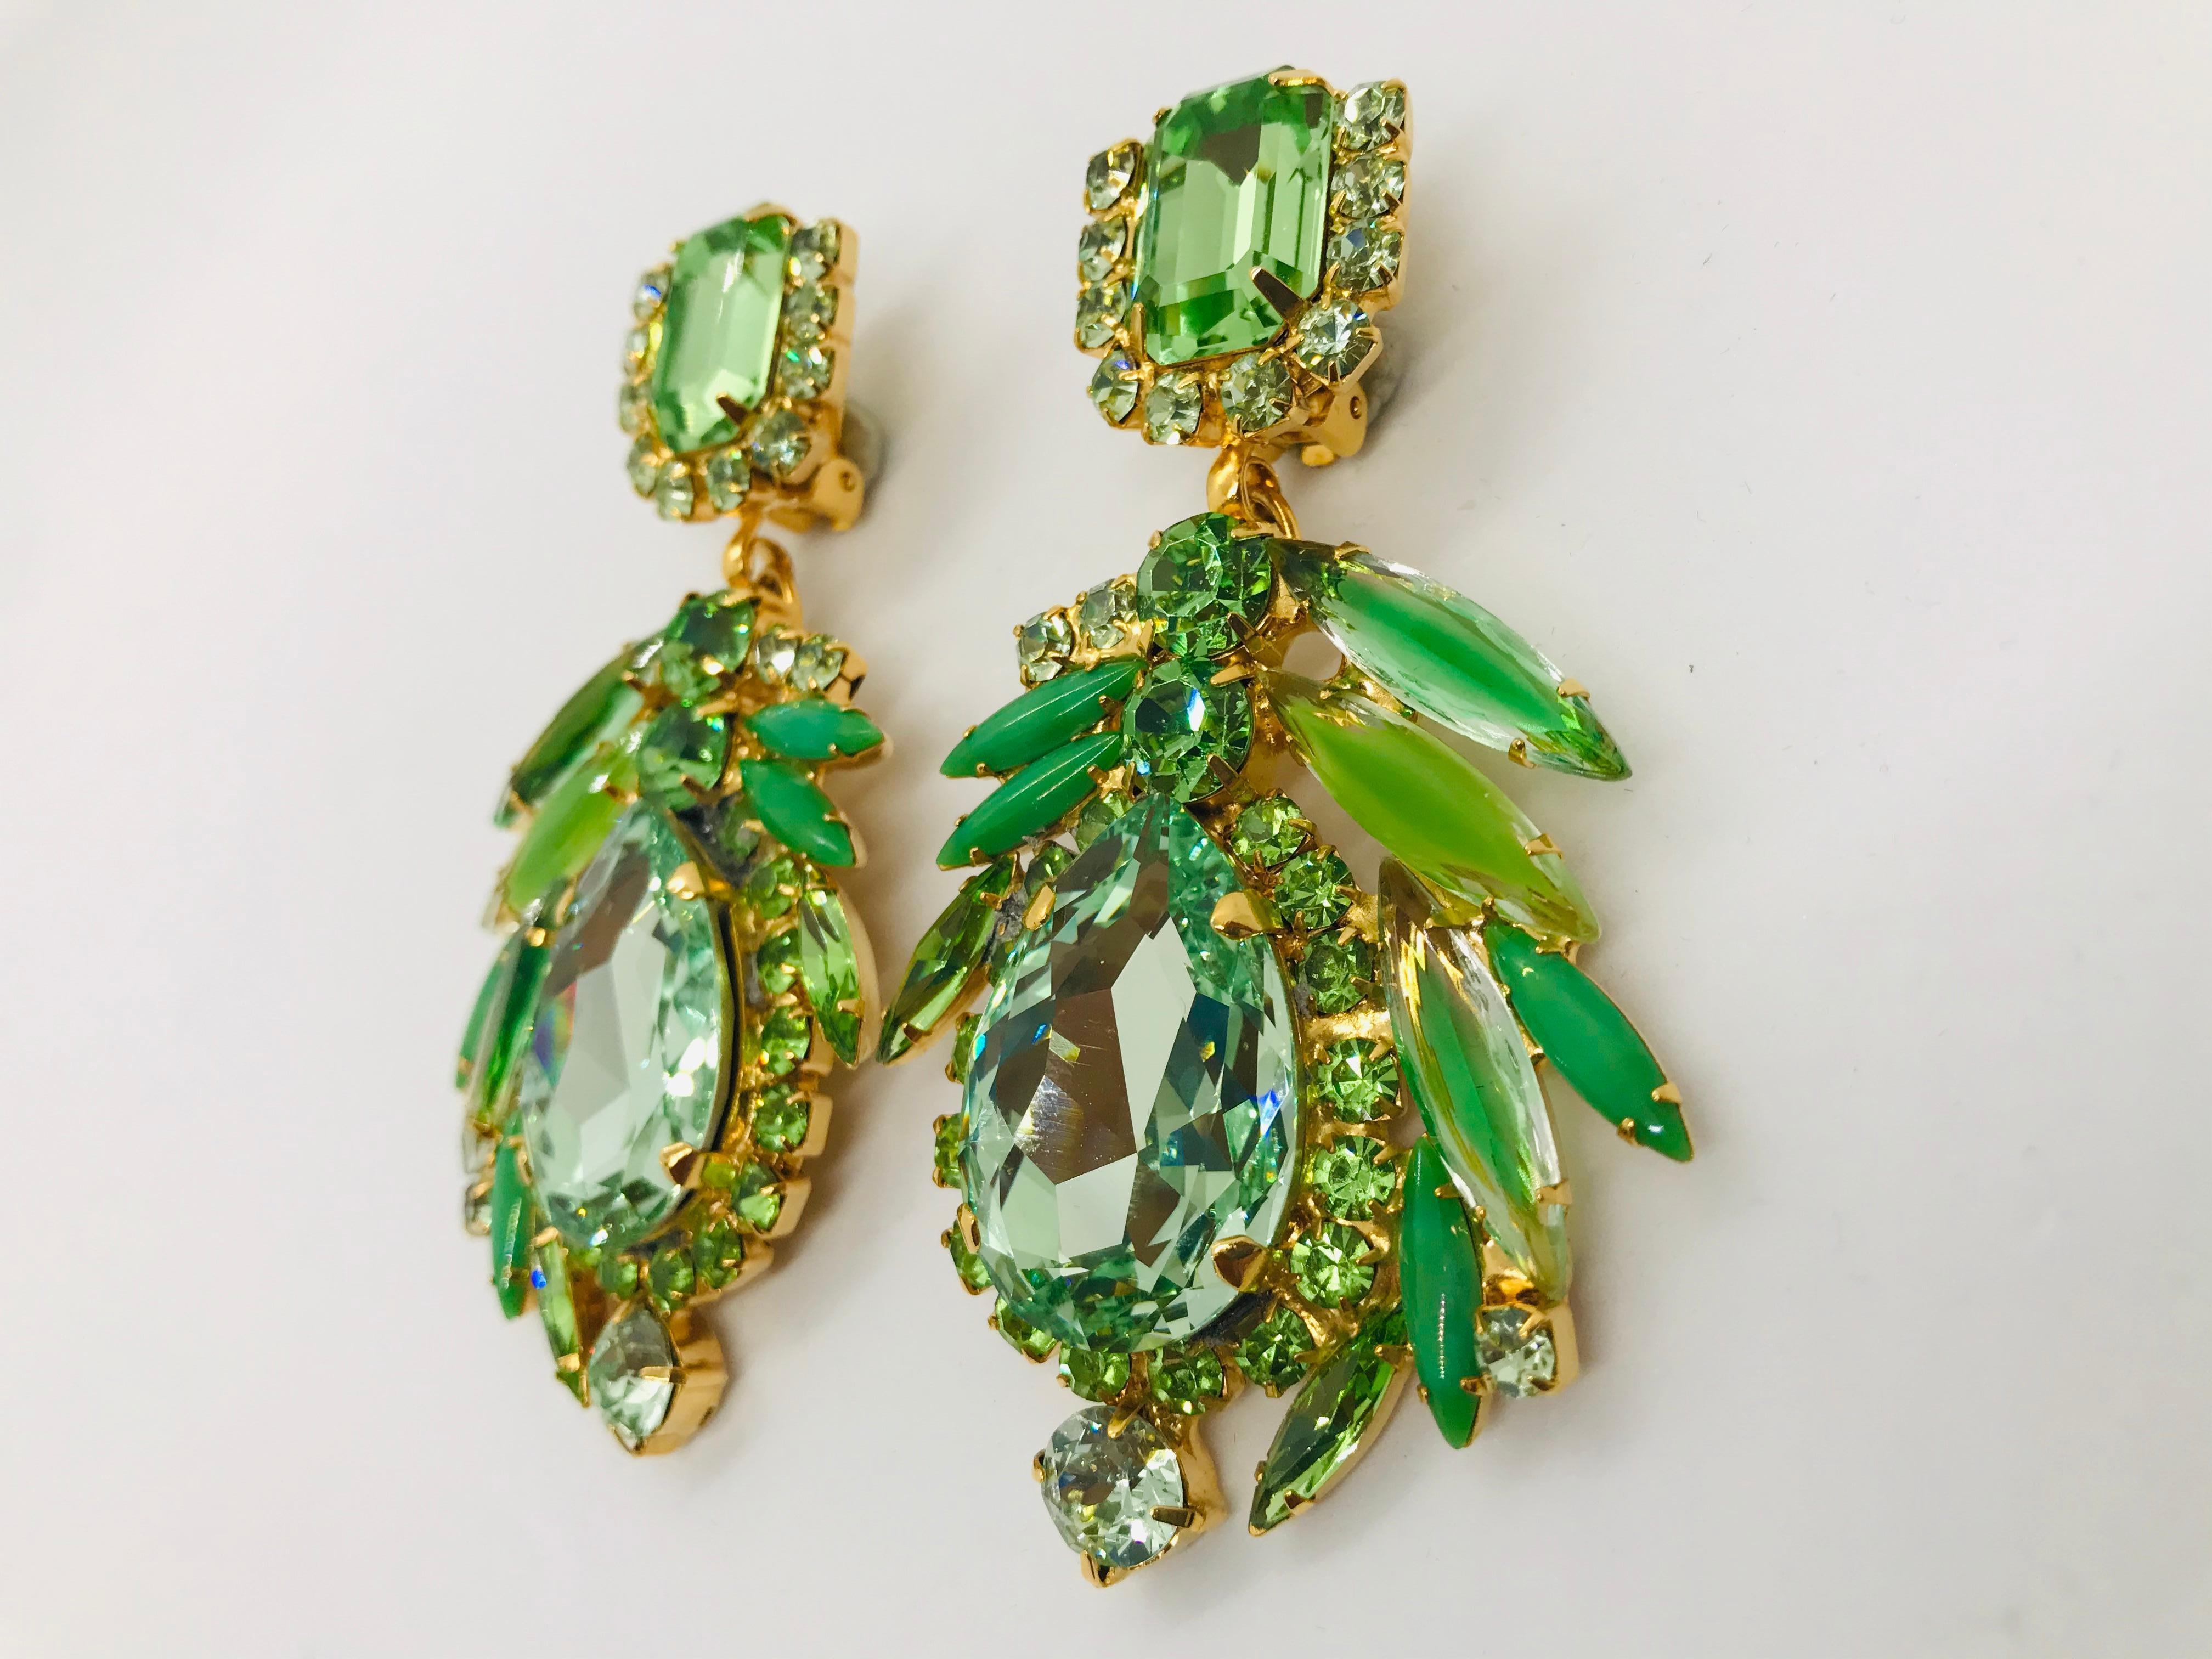 Dramatic peridot and chrysolite Austrian crystal pendant drop earrings add a bold statement to any outfit!  These multi shade green earrings feature jade, peridot and shaded chrysolite navettes from the 1960s swirling around contemporary Swarovski